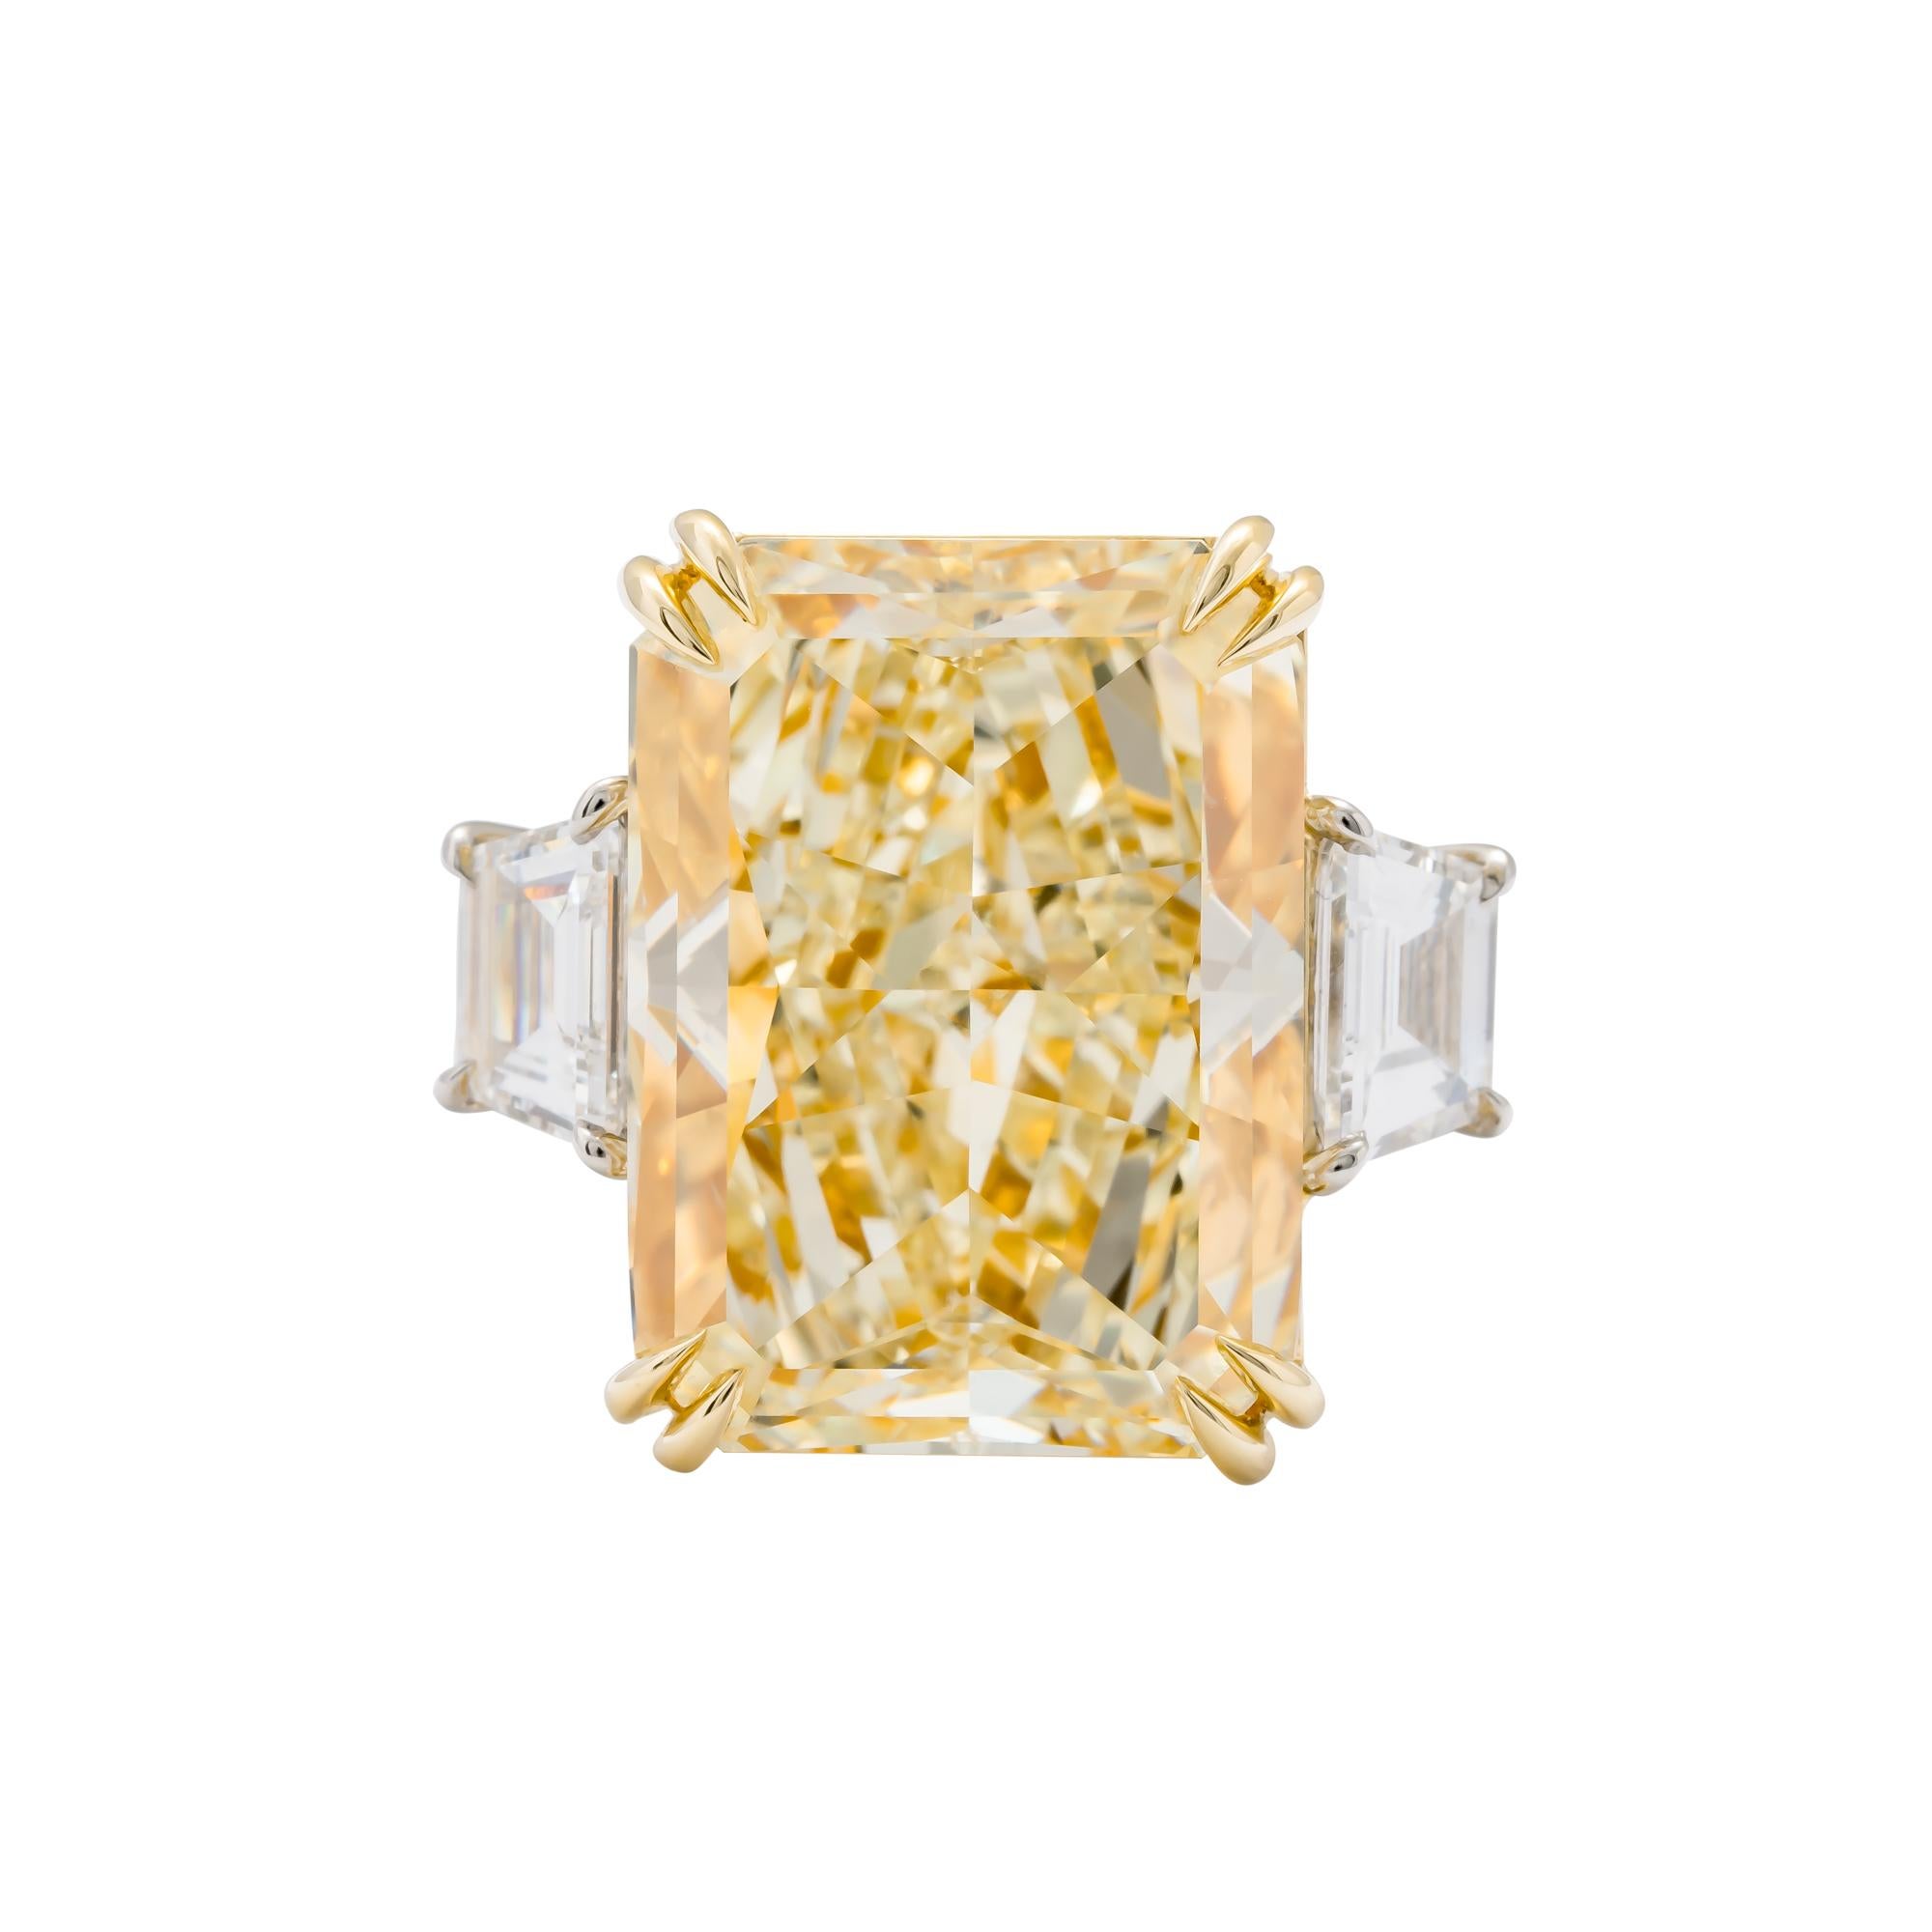 Platinum and 18 karat yellow gold 3 stone ring consisting of 1 radiant cut yellow diamond weighing 17.01 carats with color and clarity of FY/VS2 GIA #5182705391 flanked by 2 trapezoid diamonds weighing a total of 1.27 carats. D VVS2 Size 6.5